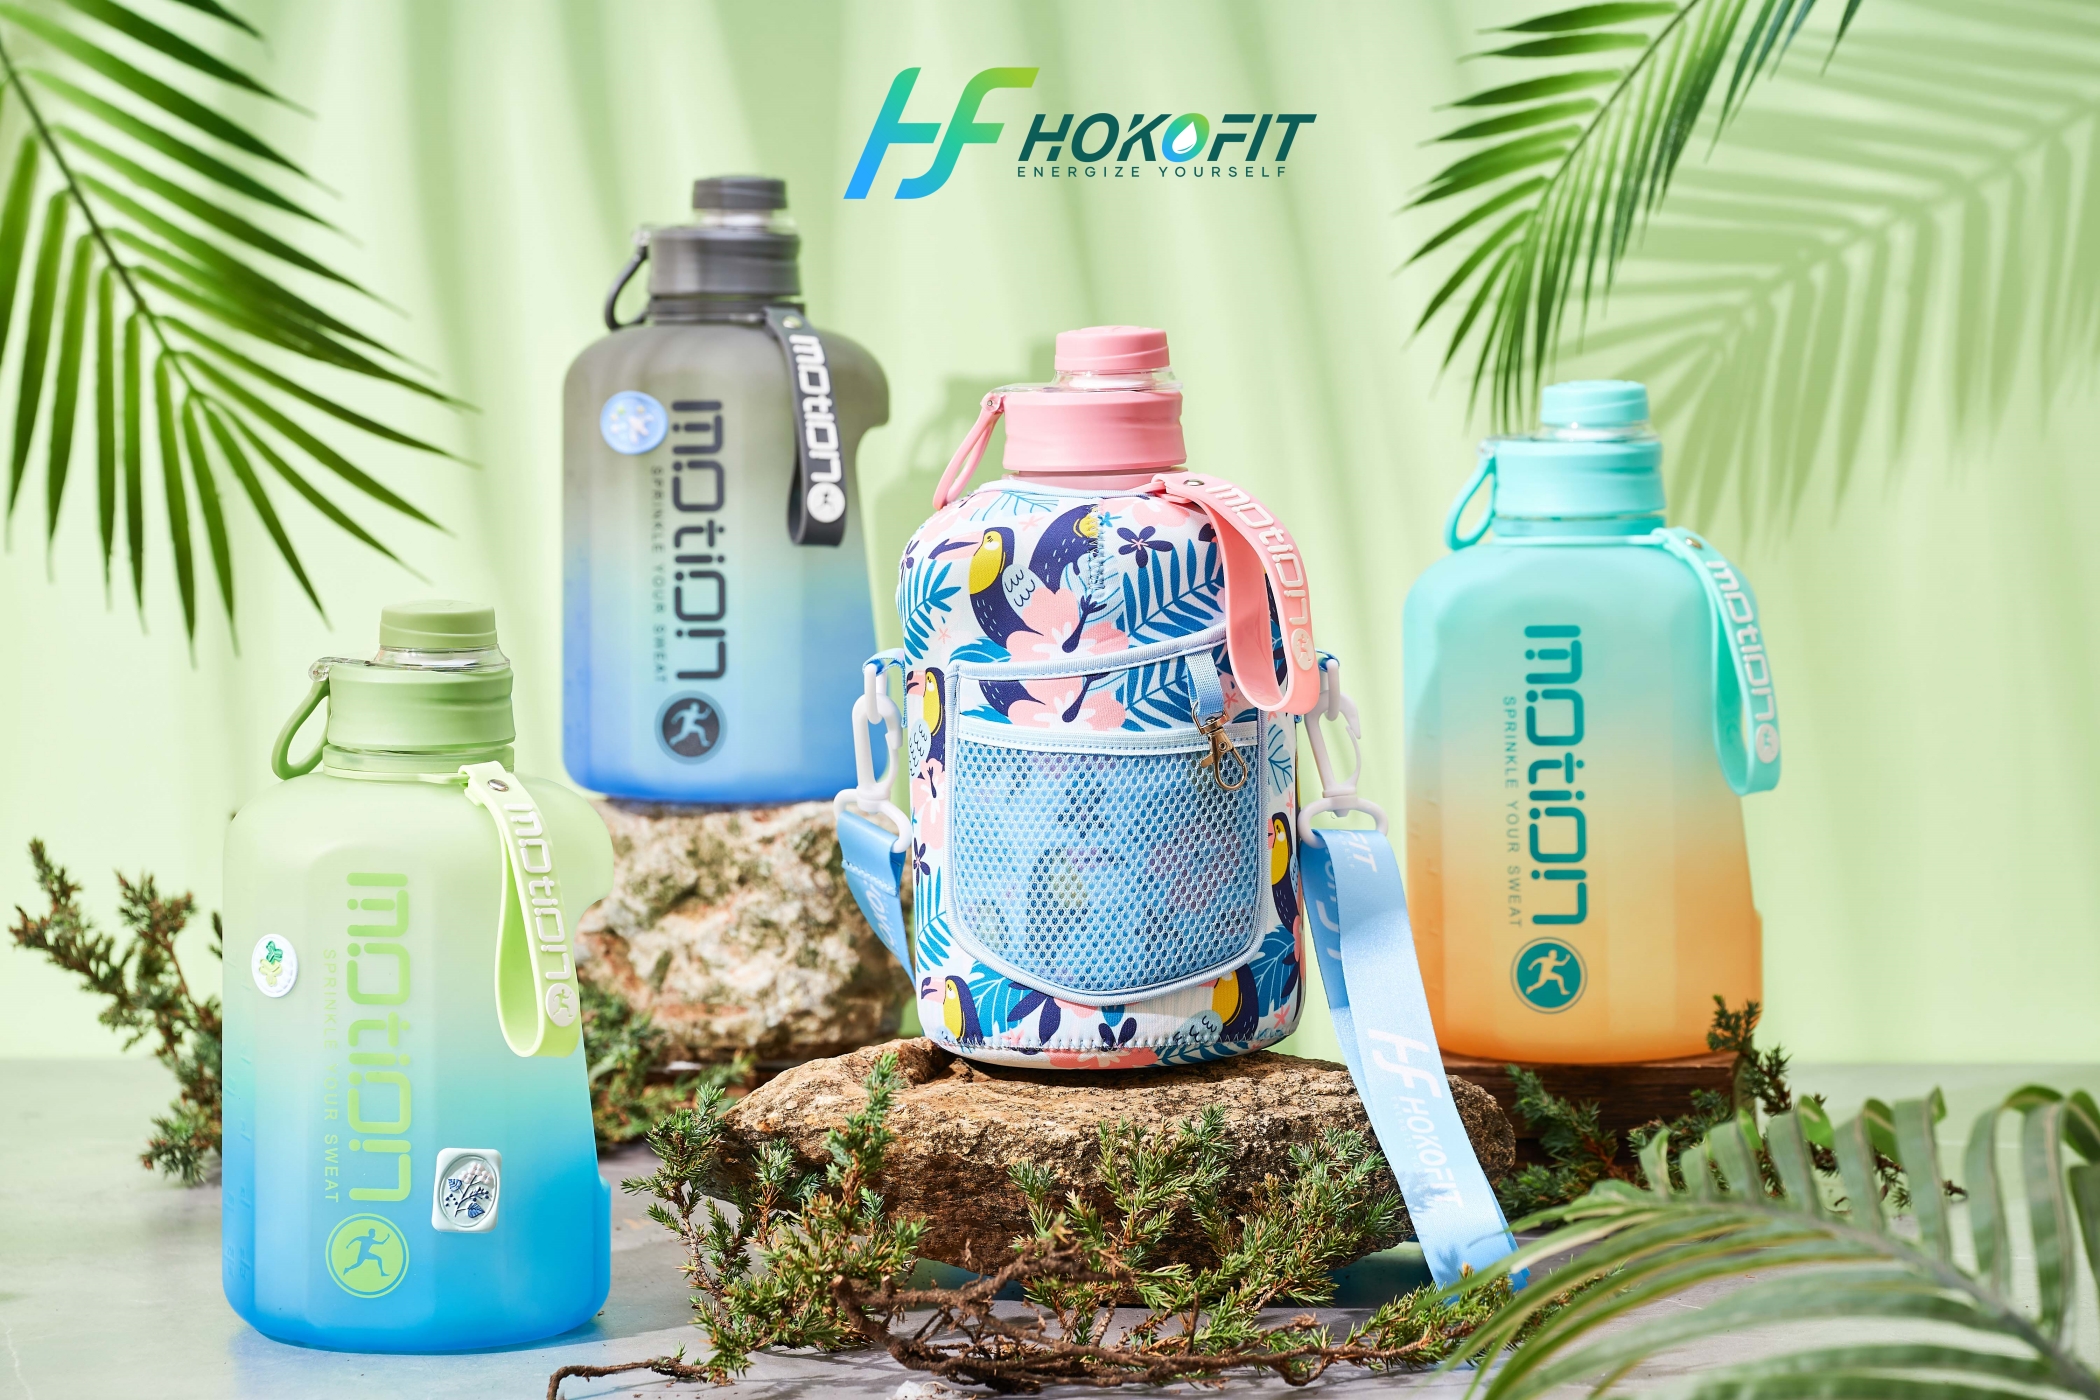 Thehokofit Launches Its New 72oz Water Bottle - The Perfect Way to Stay  Hydrated All Day Long